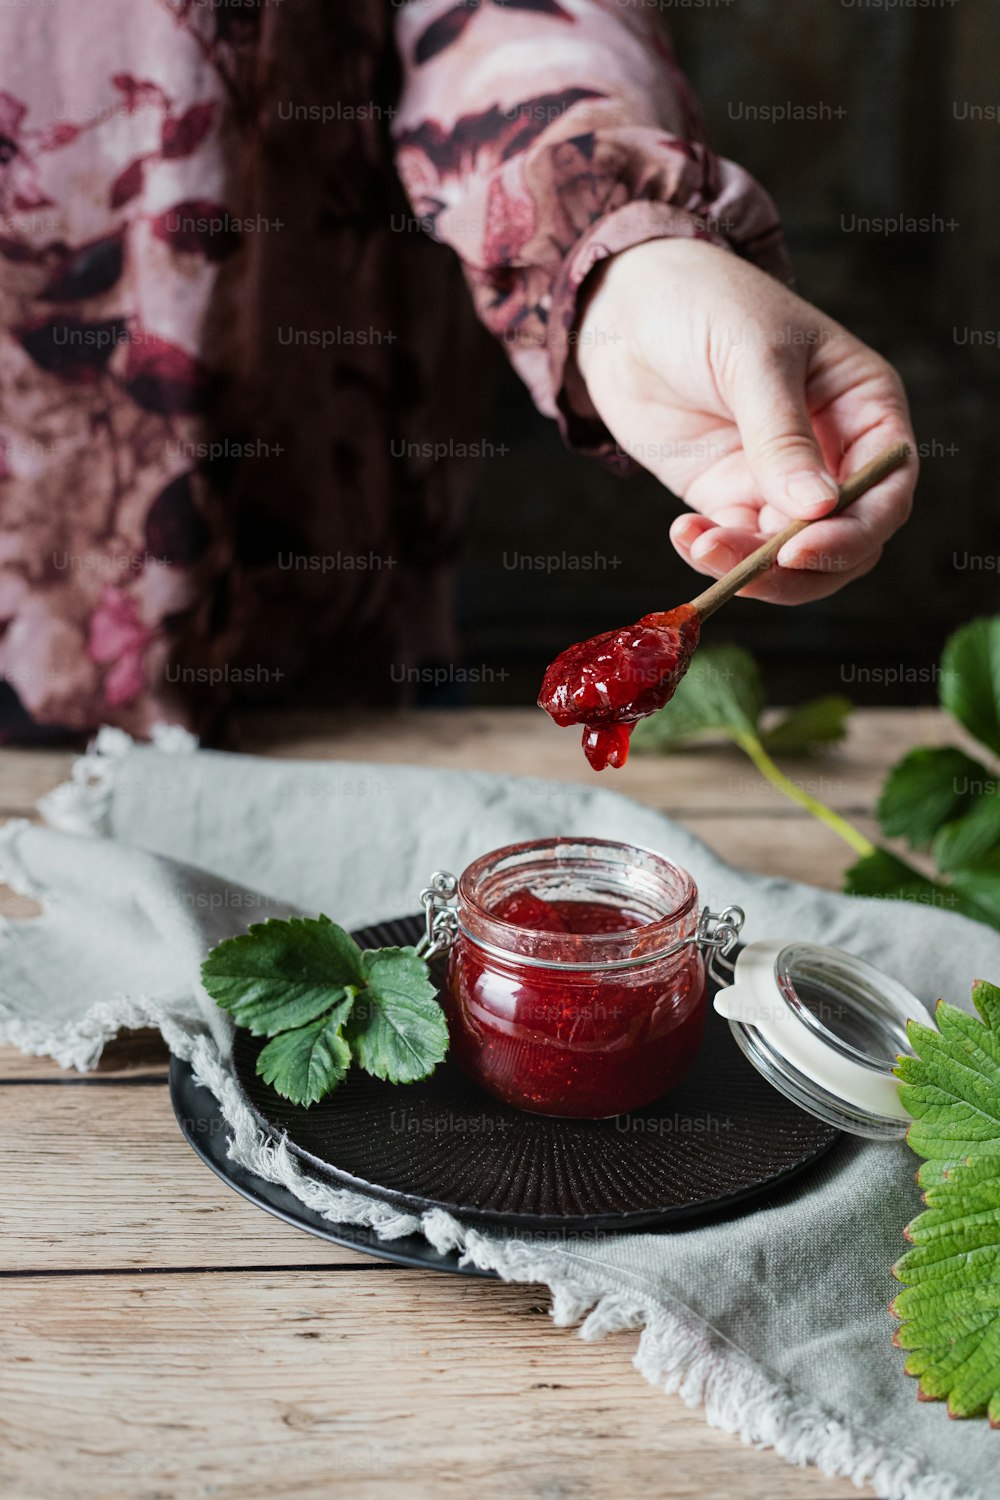 a person holding a spoon with a jar of jam on it